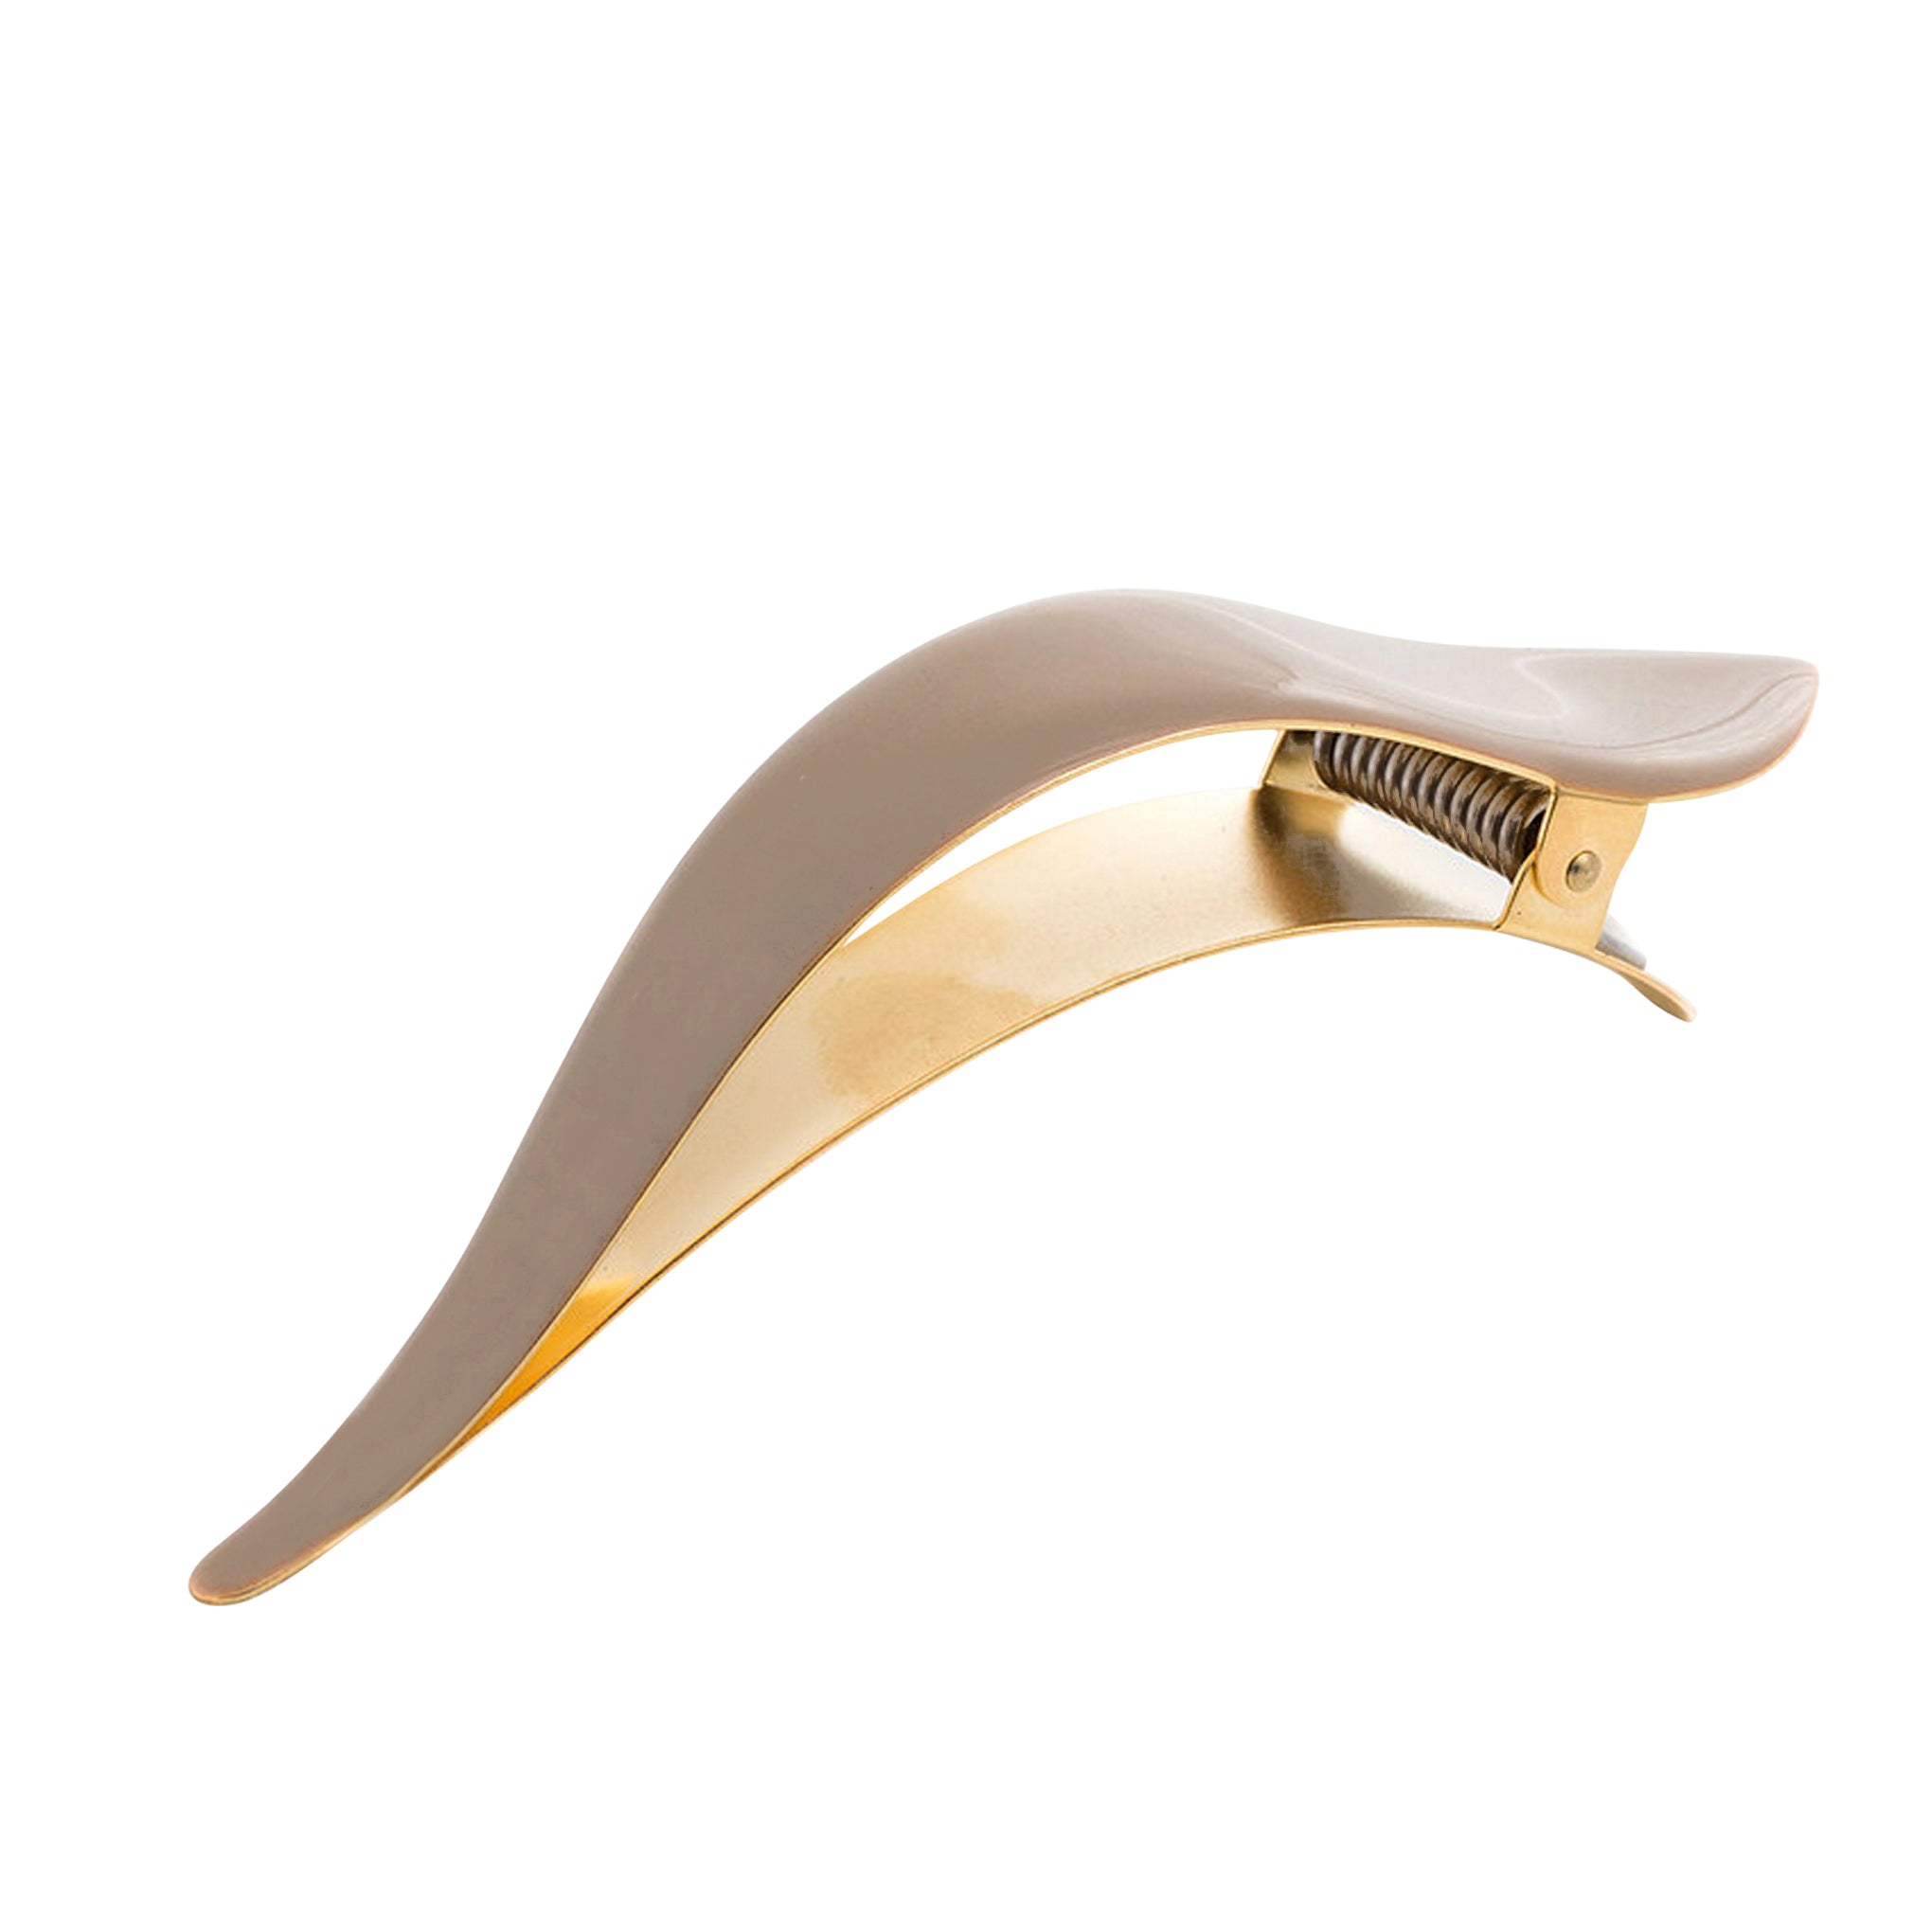 Ficcare Maximas Hair Clip in Sahara Sand Enamel and Gold Plated